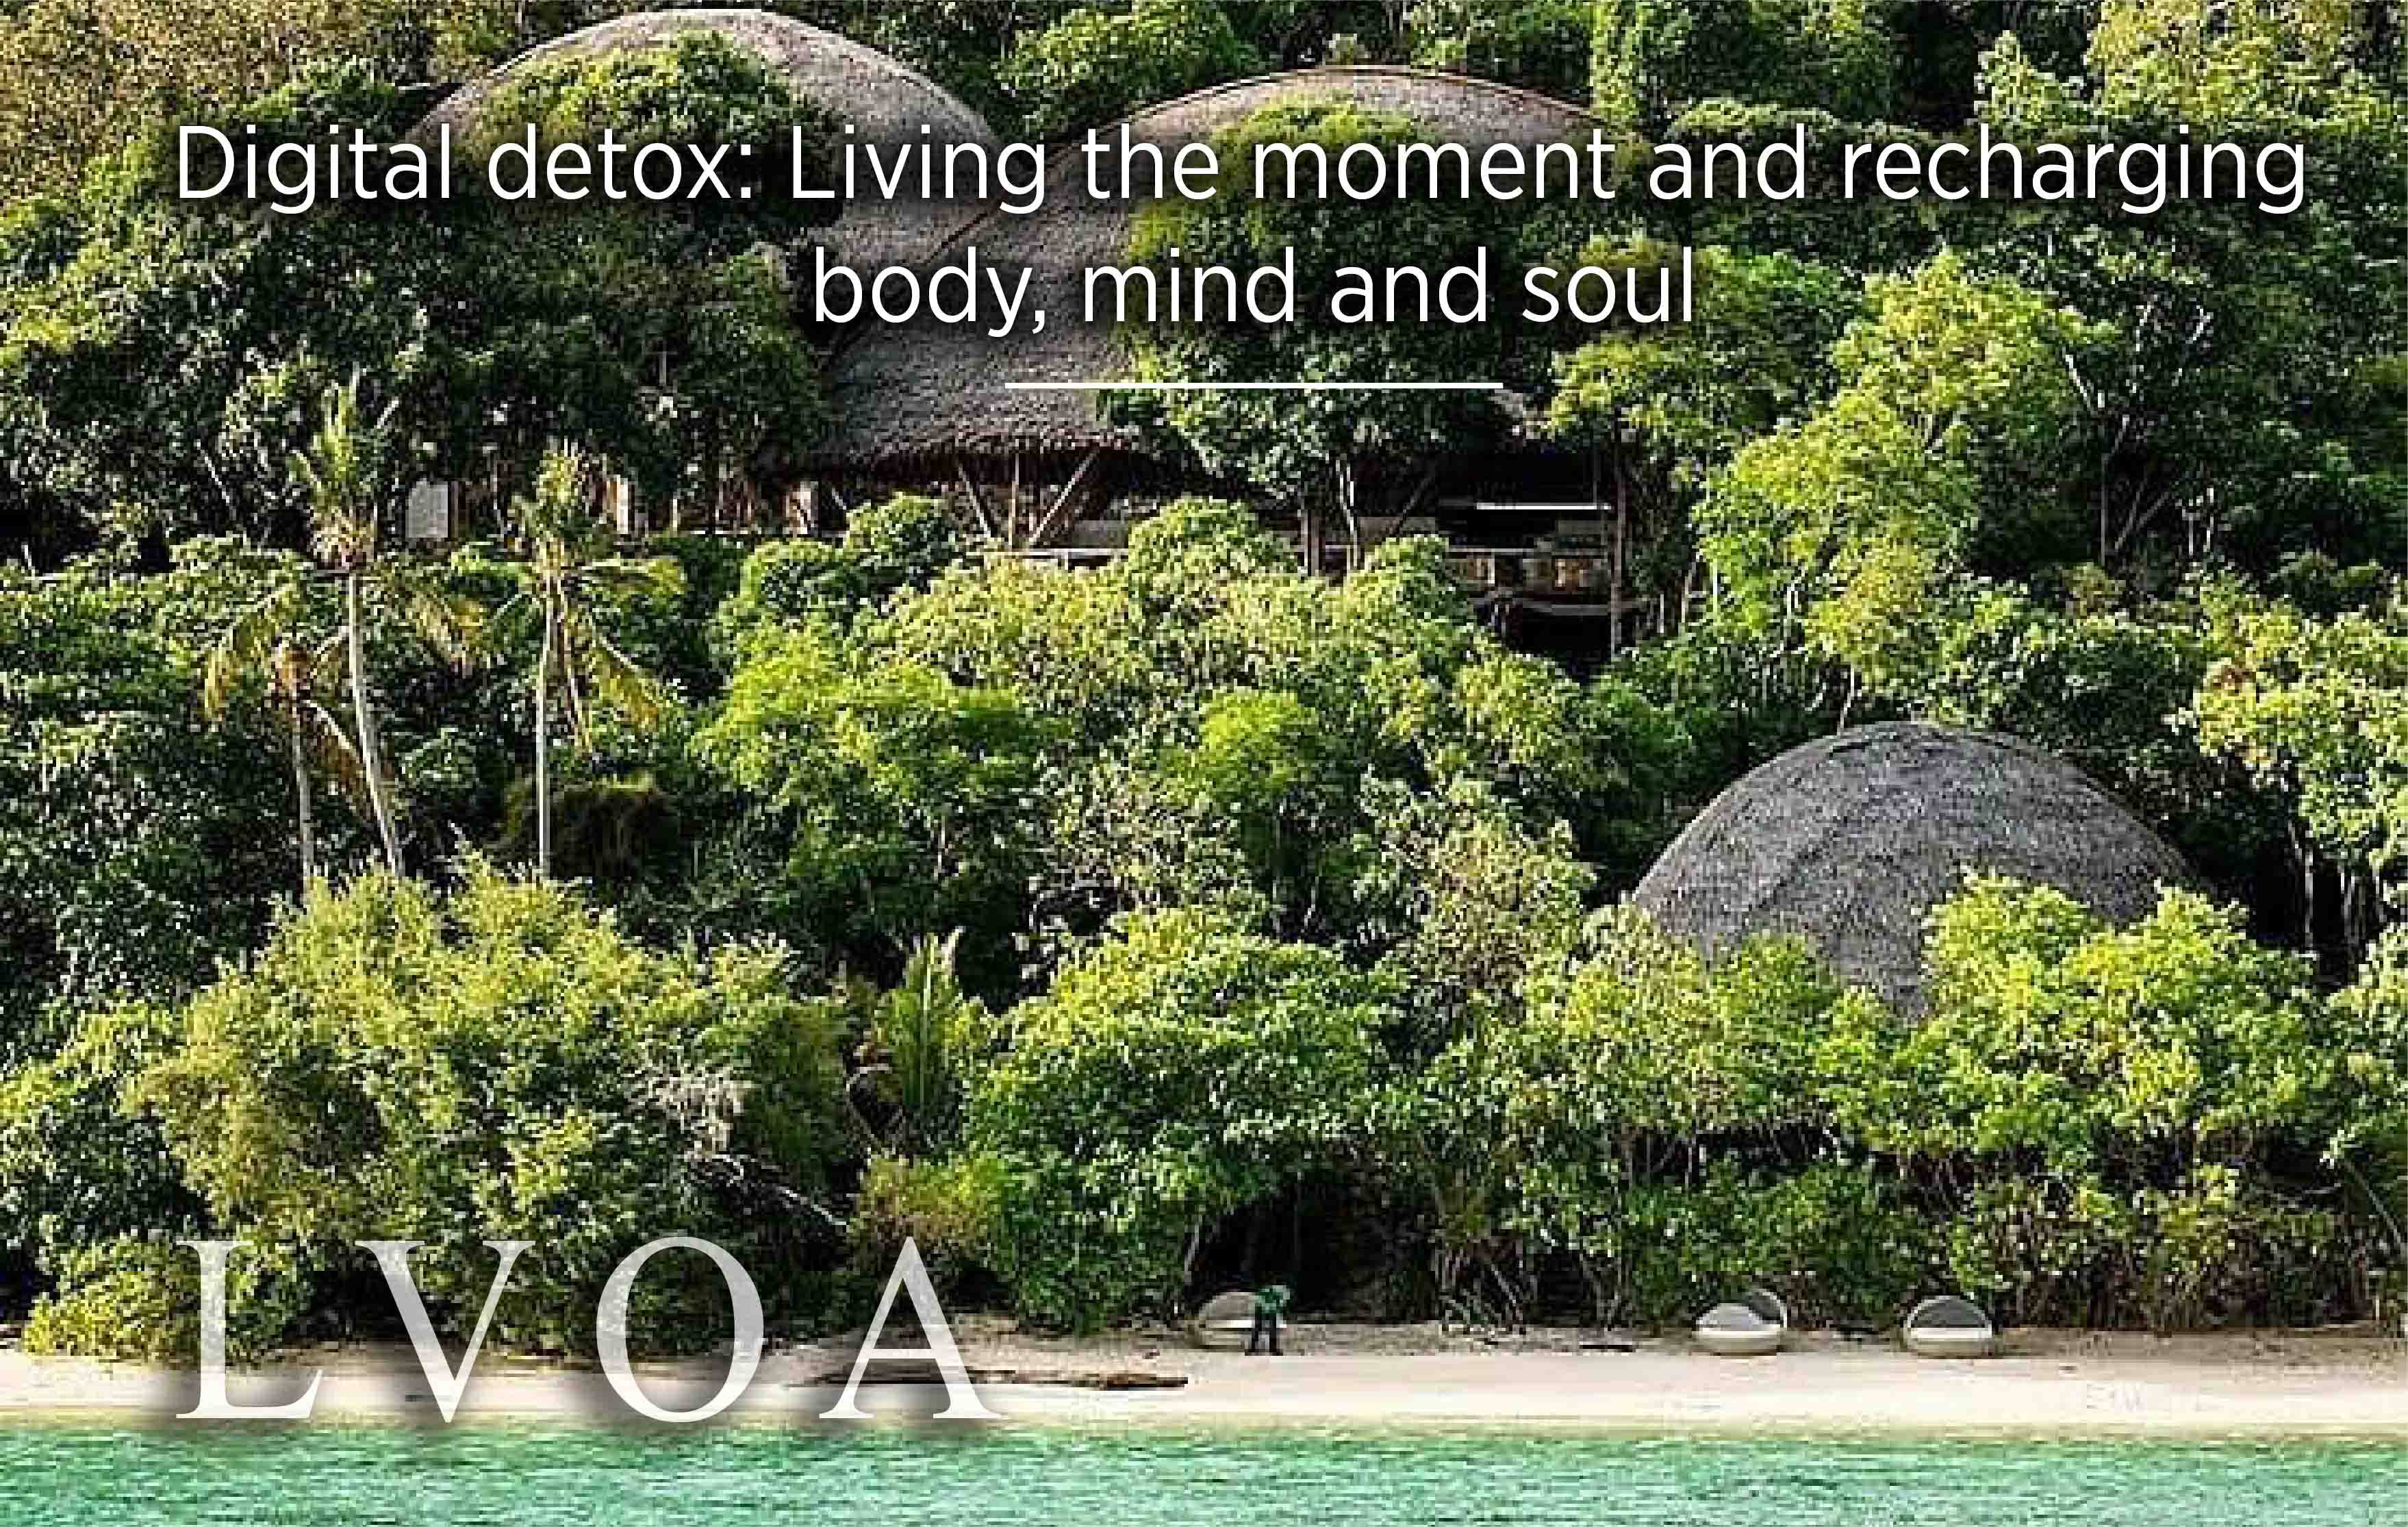 Digital-detox-Living-the-moment-and-recharging-body-mind-and-soul_LVO_Associates